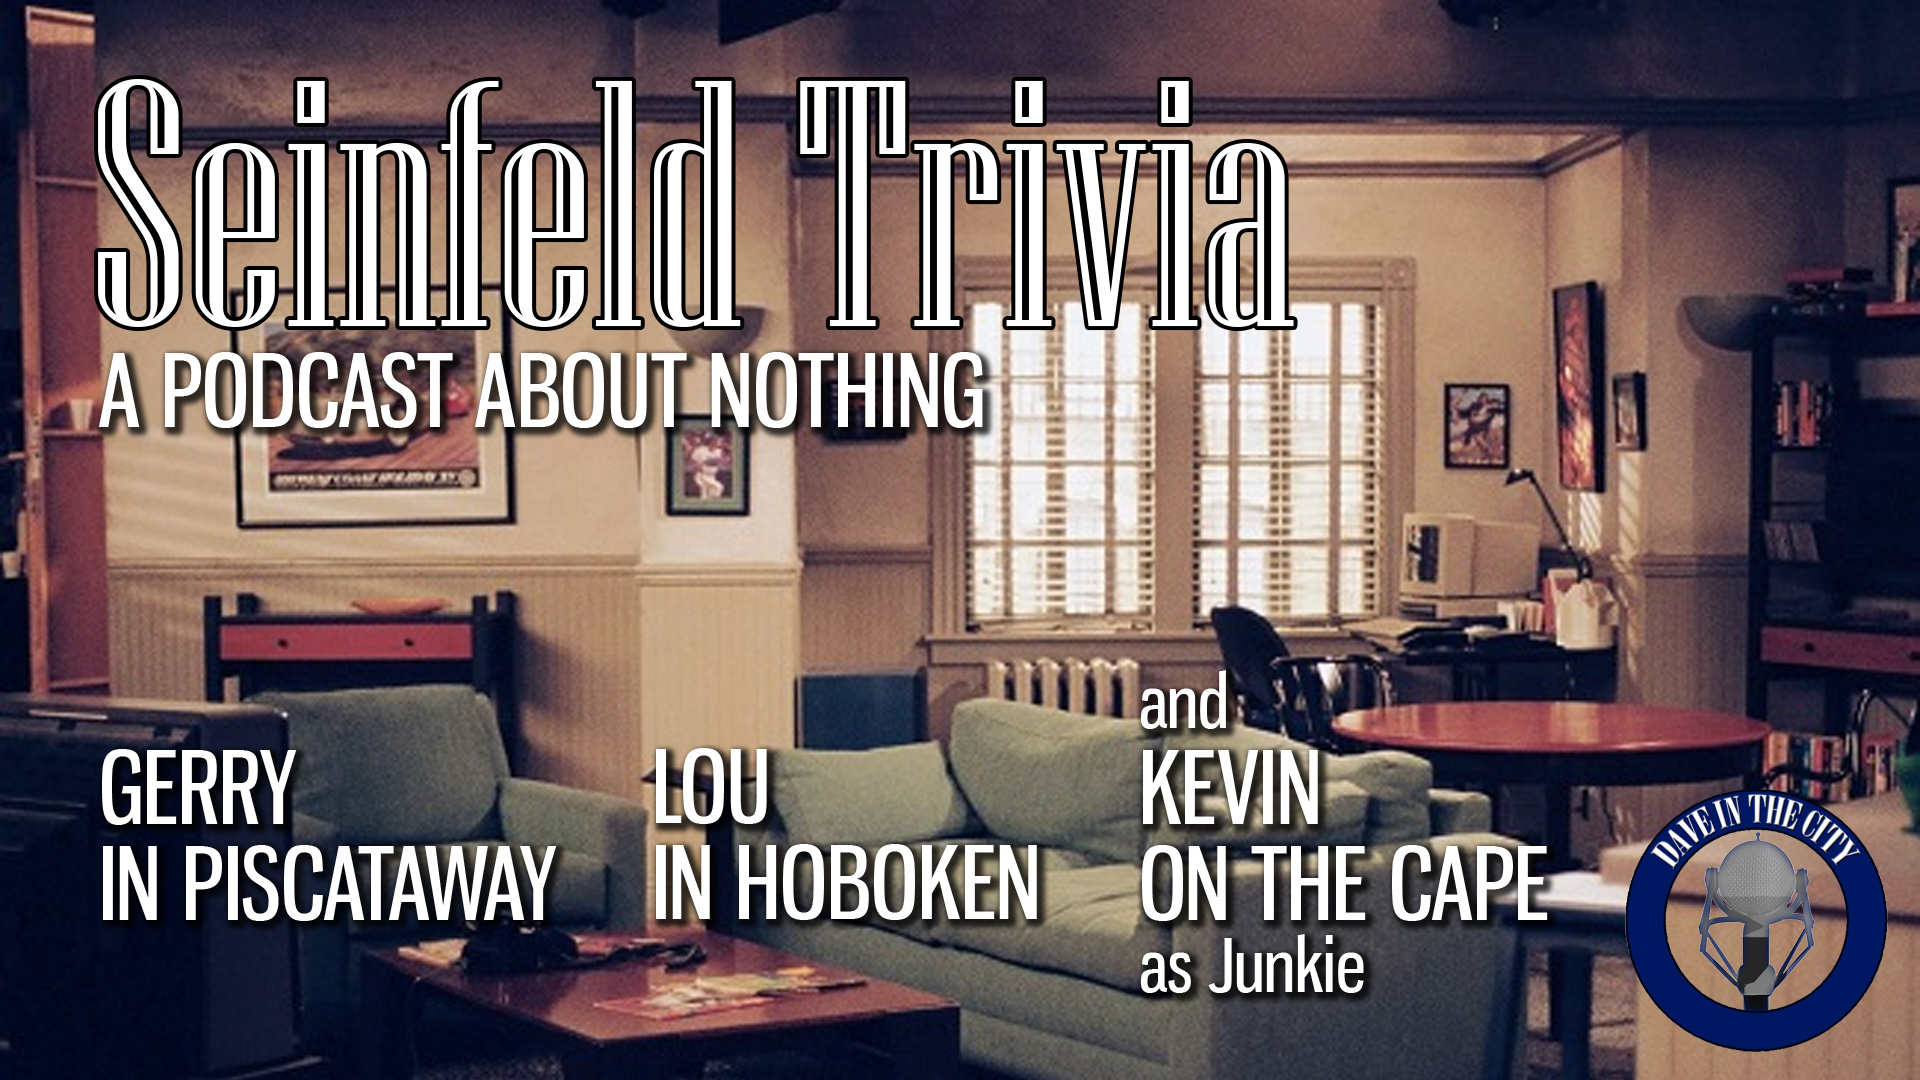 Podcast: Seinfeld Trivia: A Podcast About Nothing (04-05-16)